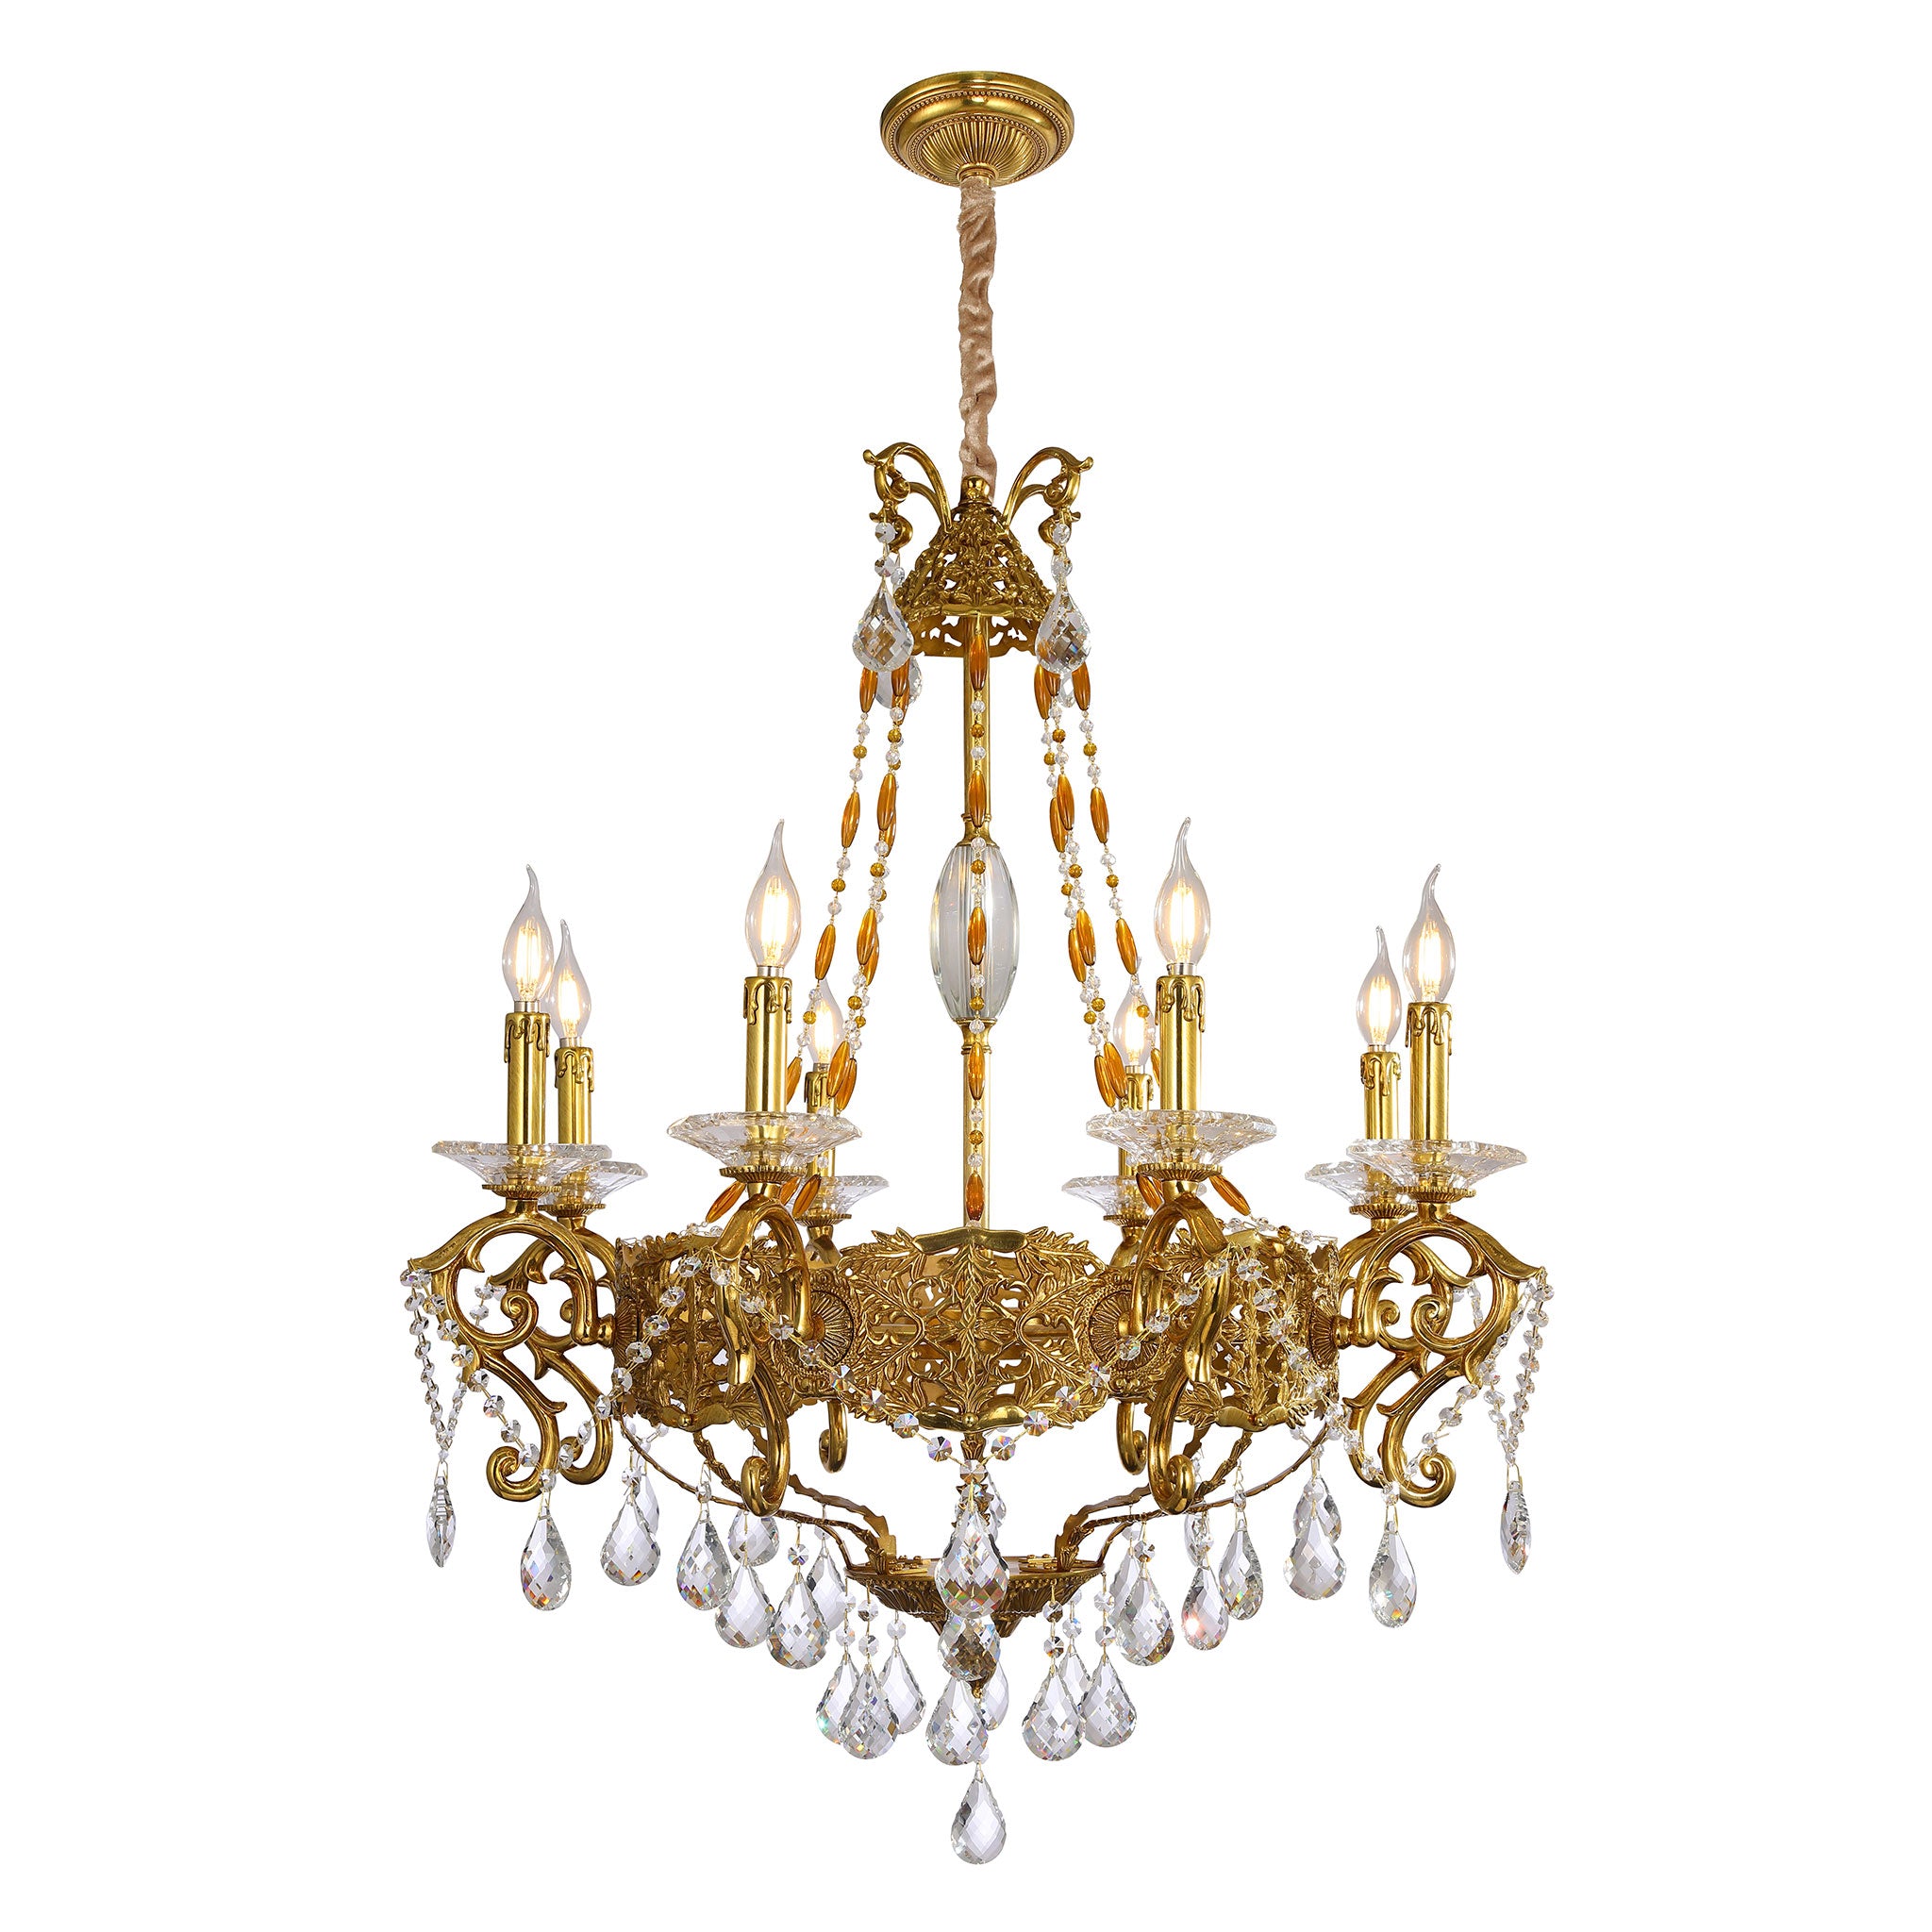 Eight Arm Chandelier with Large Crystal Prisms And Intricate Brass